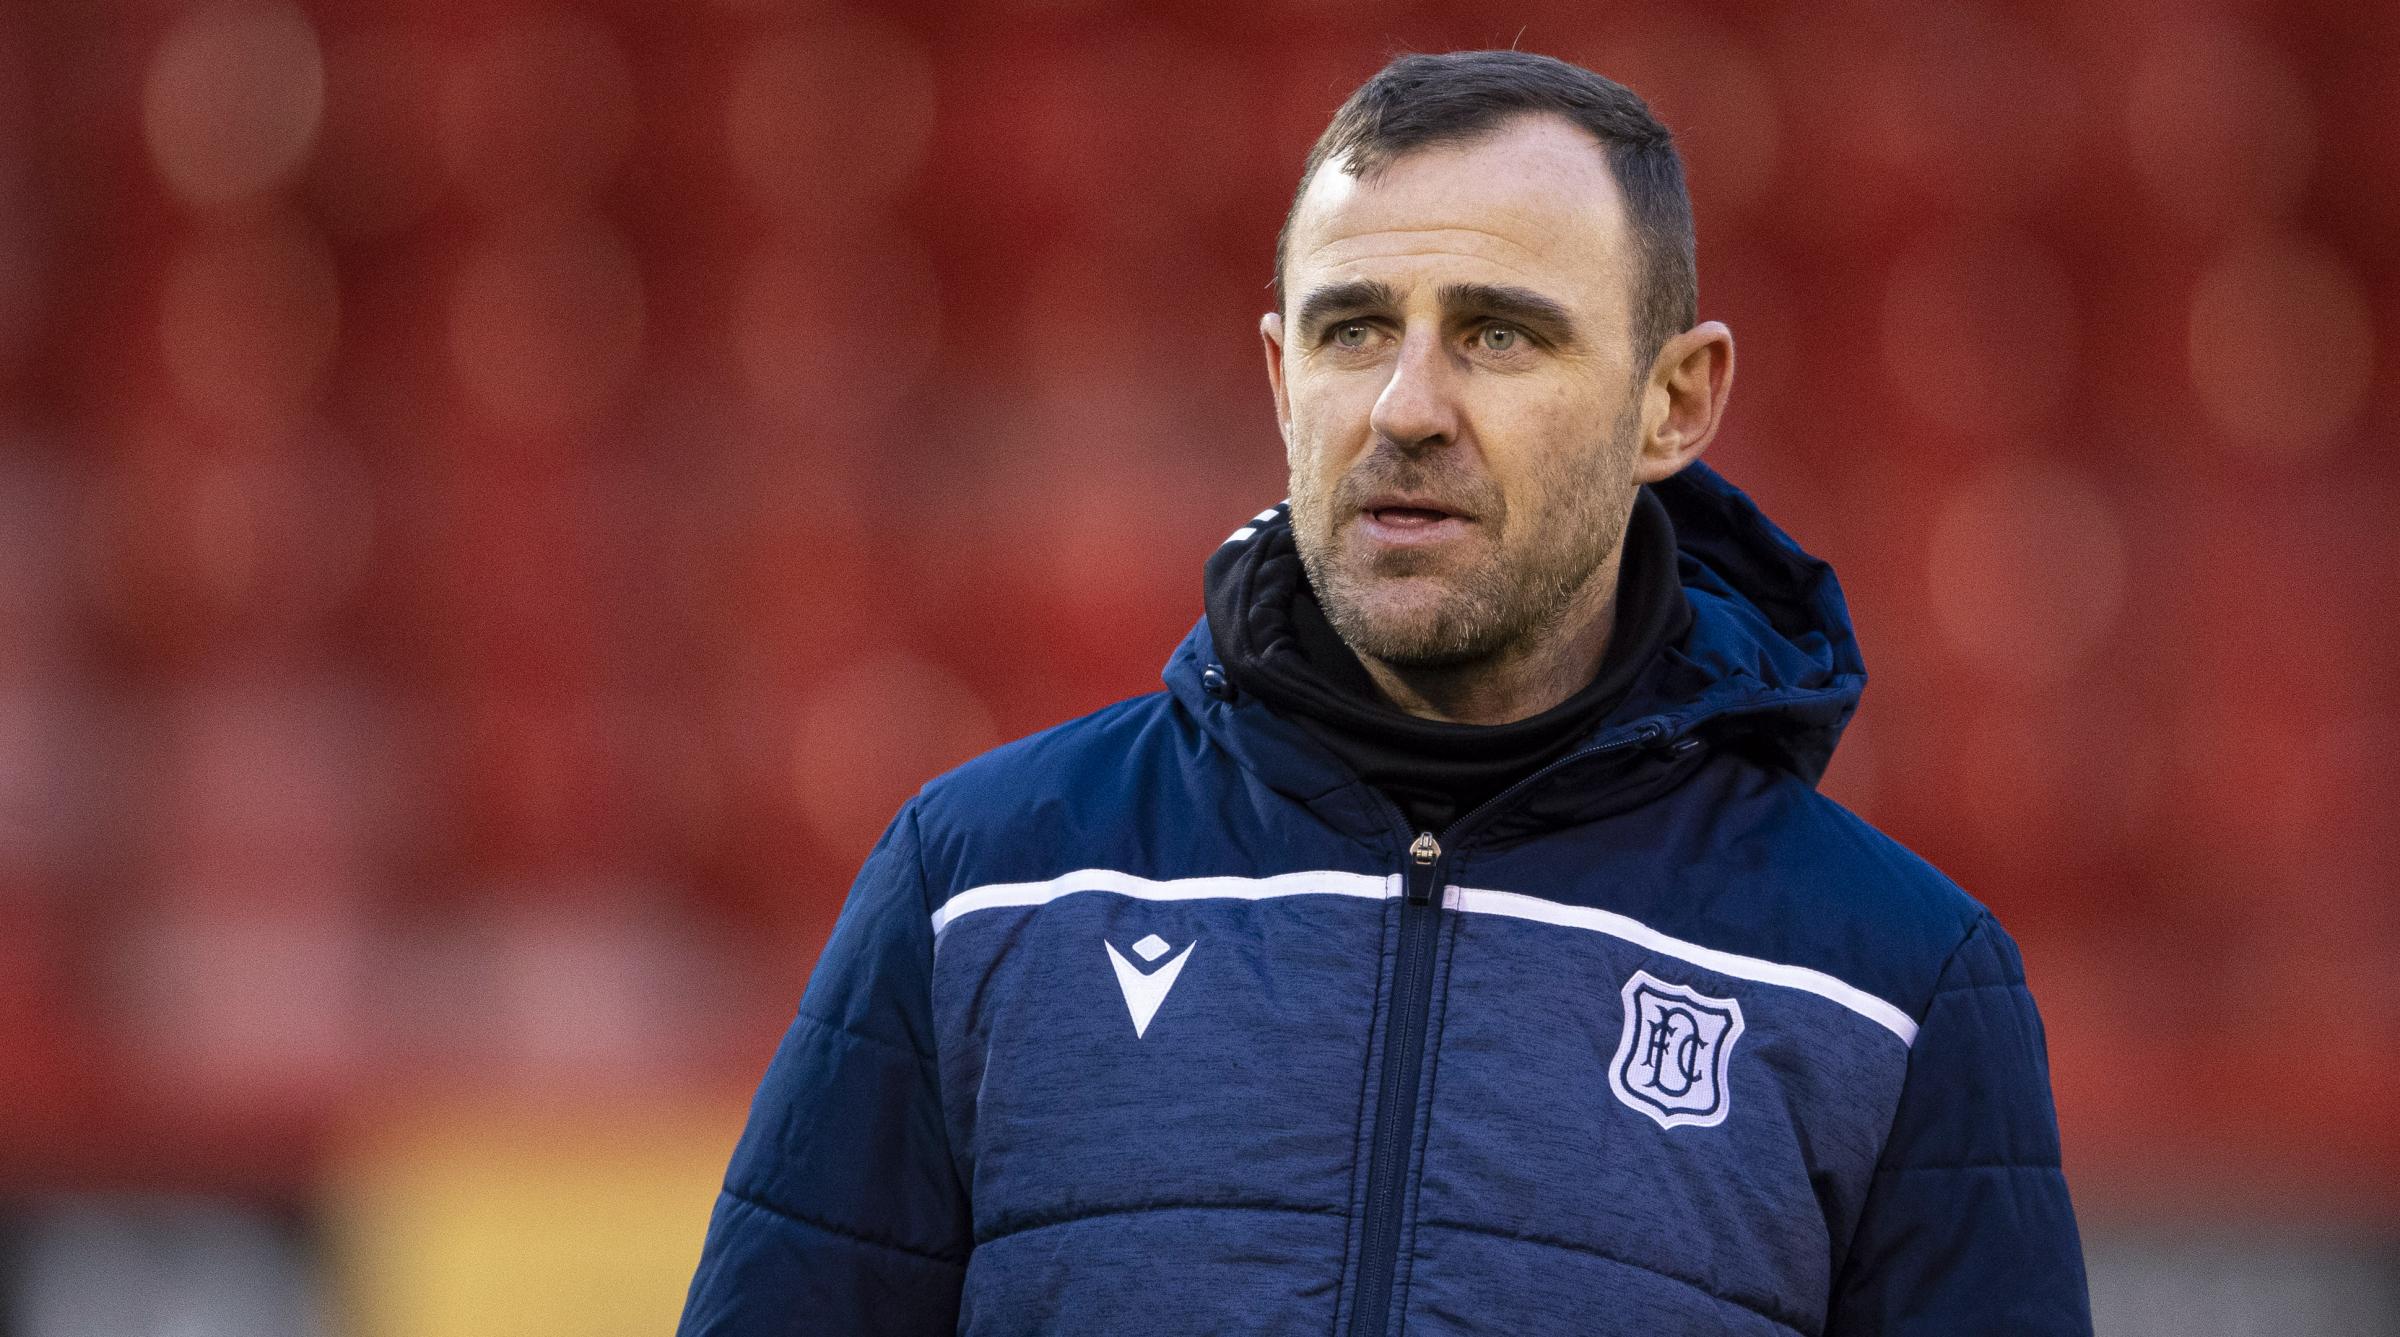 Dave Mackay reveals he turned down Dundee stay to join James McPake at Dunfermline